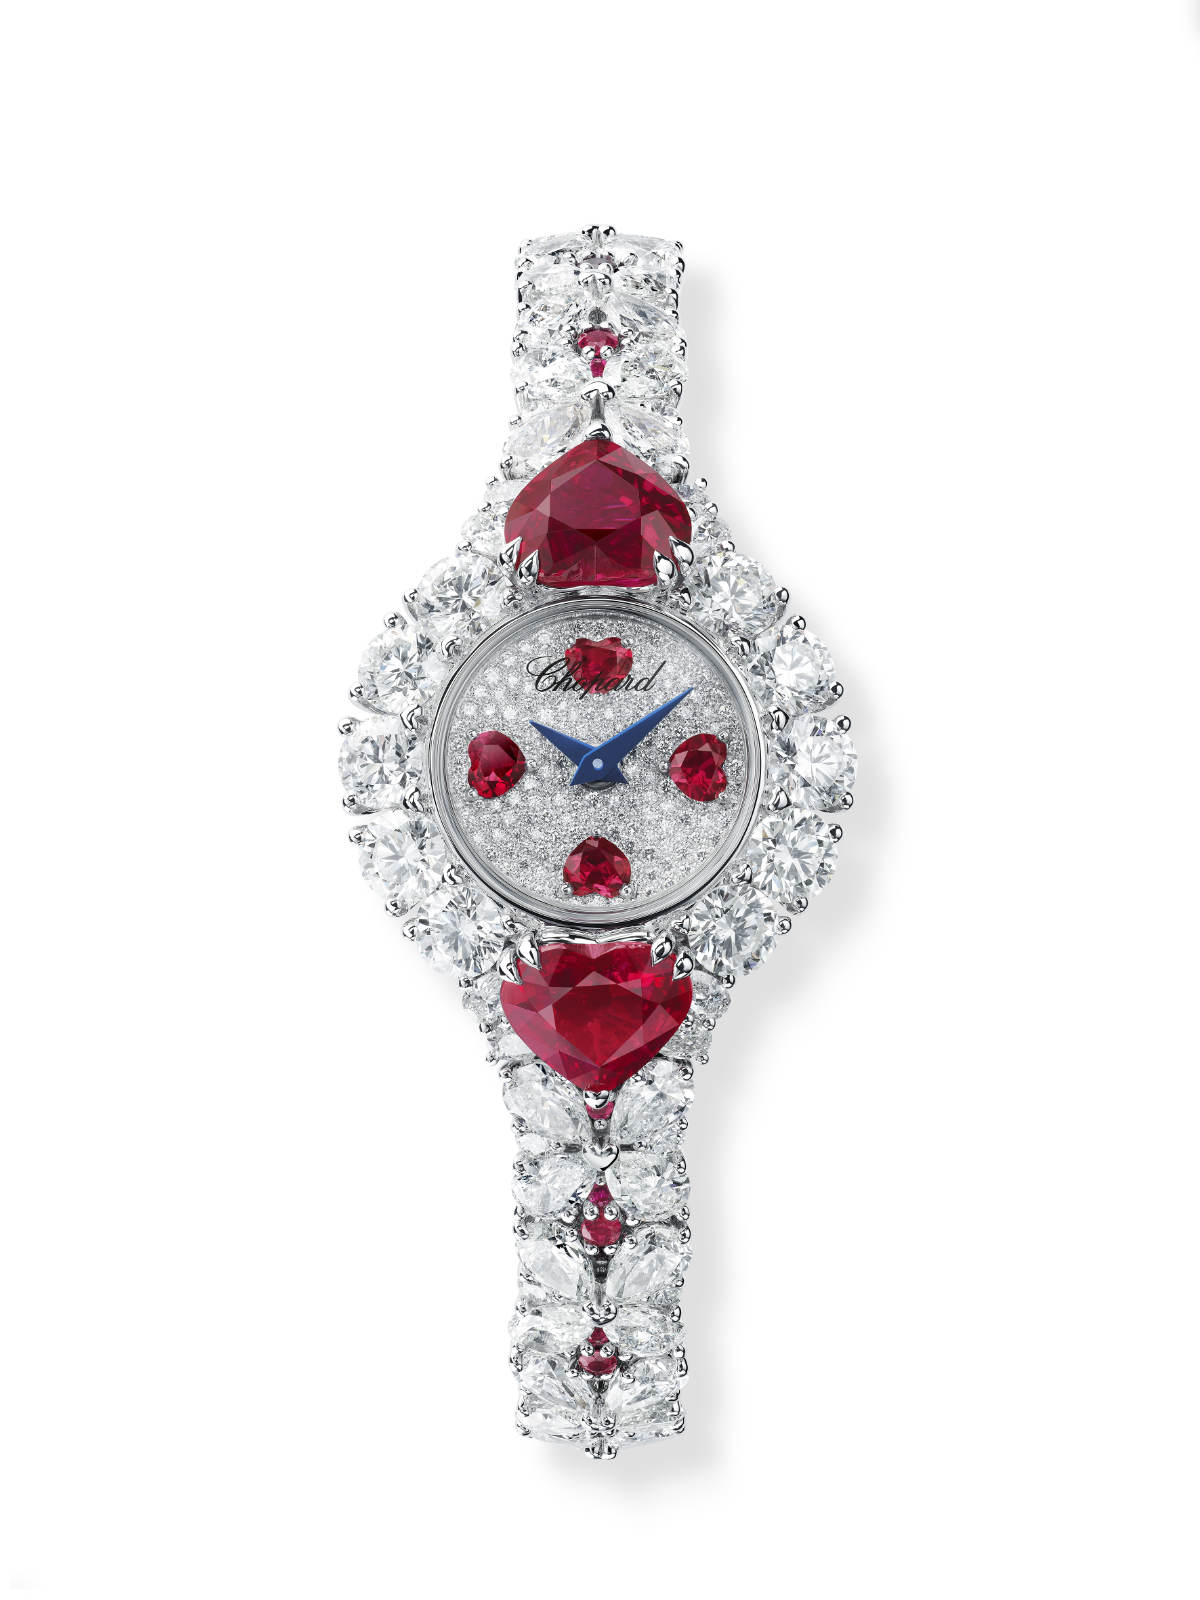 Red Carpet Collection: ‘Chopard Loves Cinema’